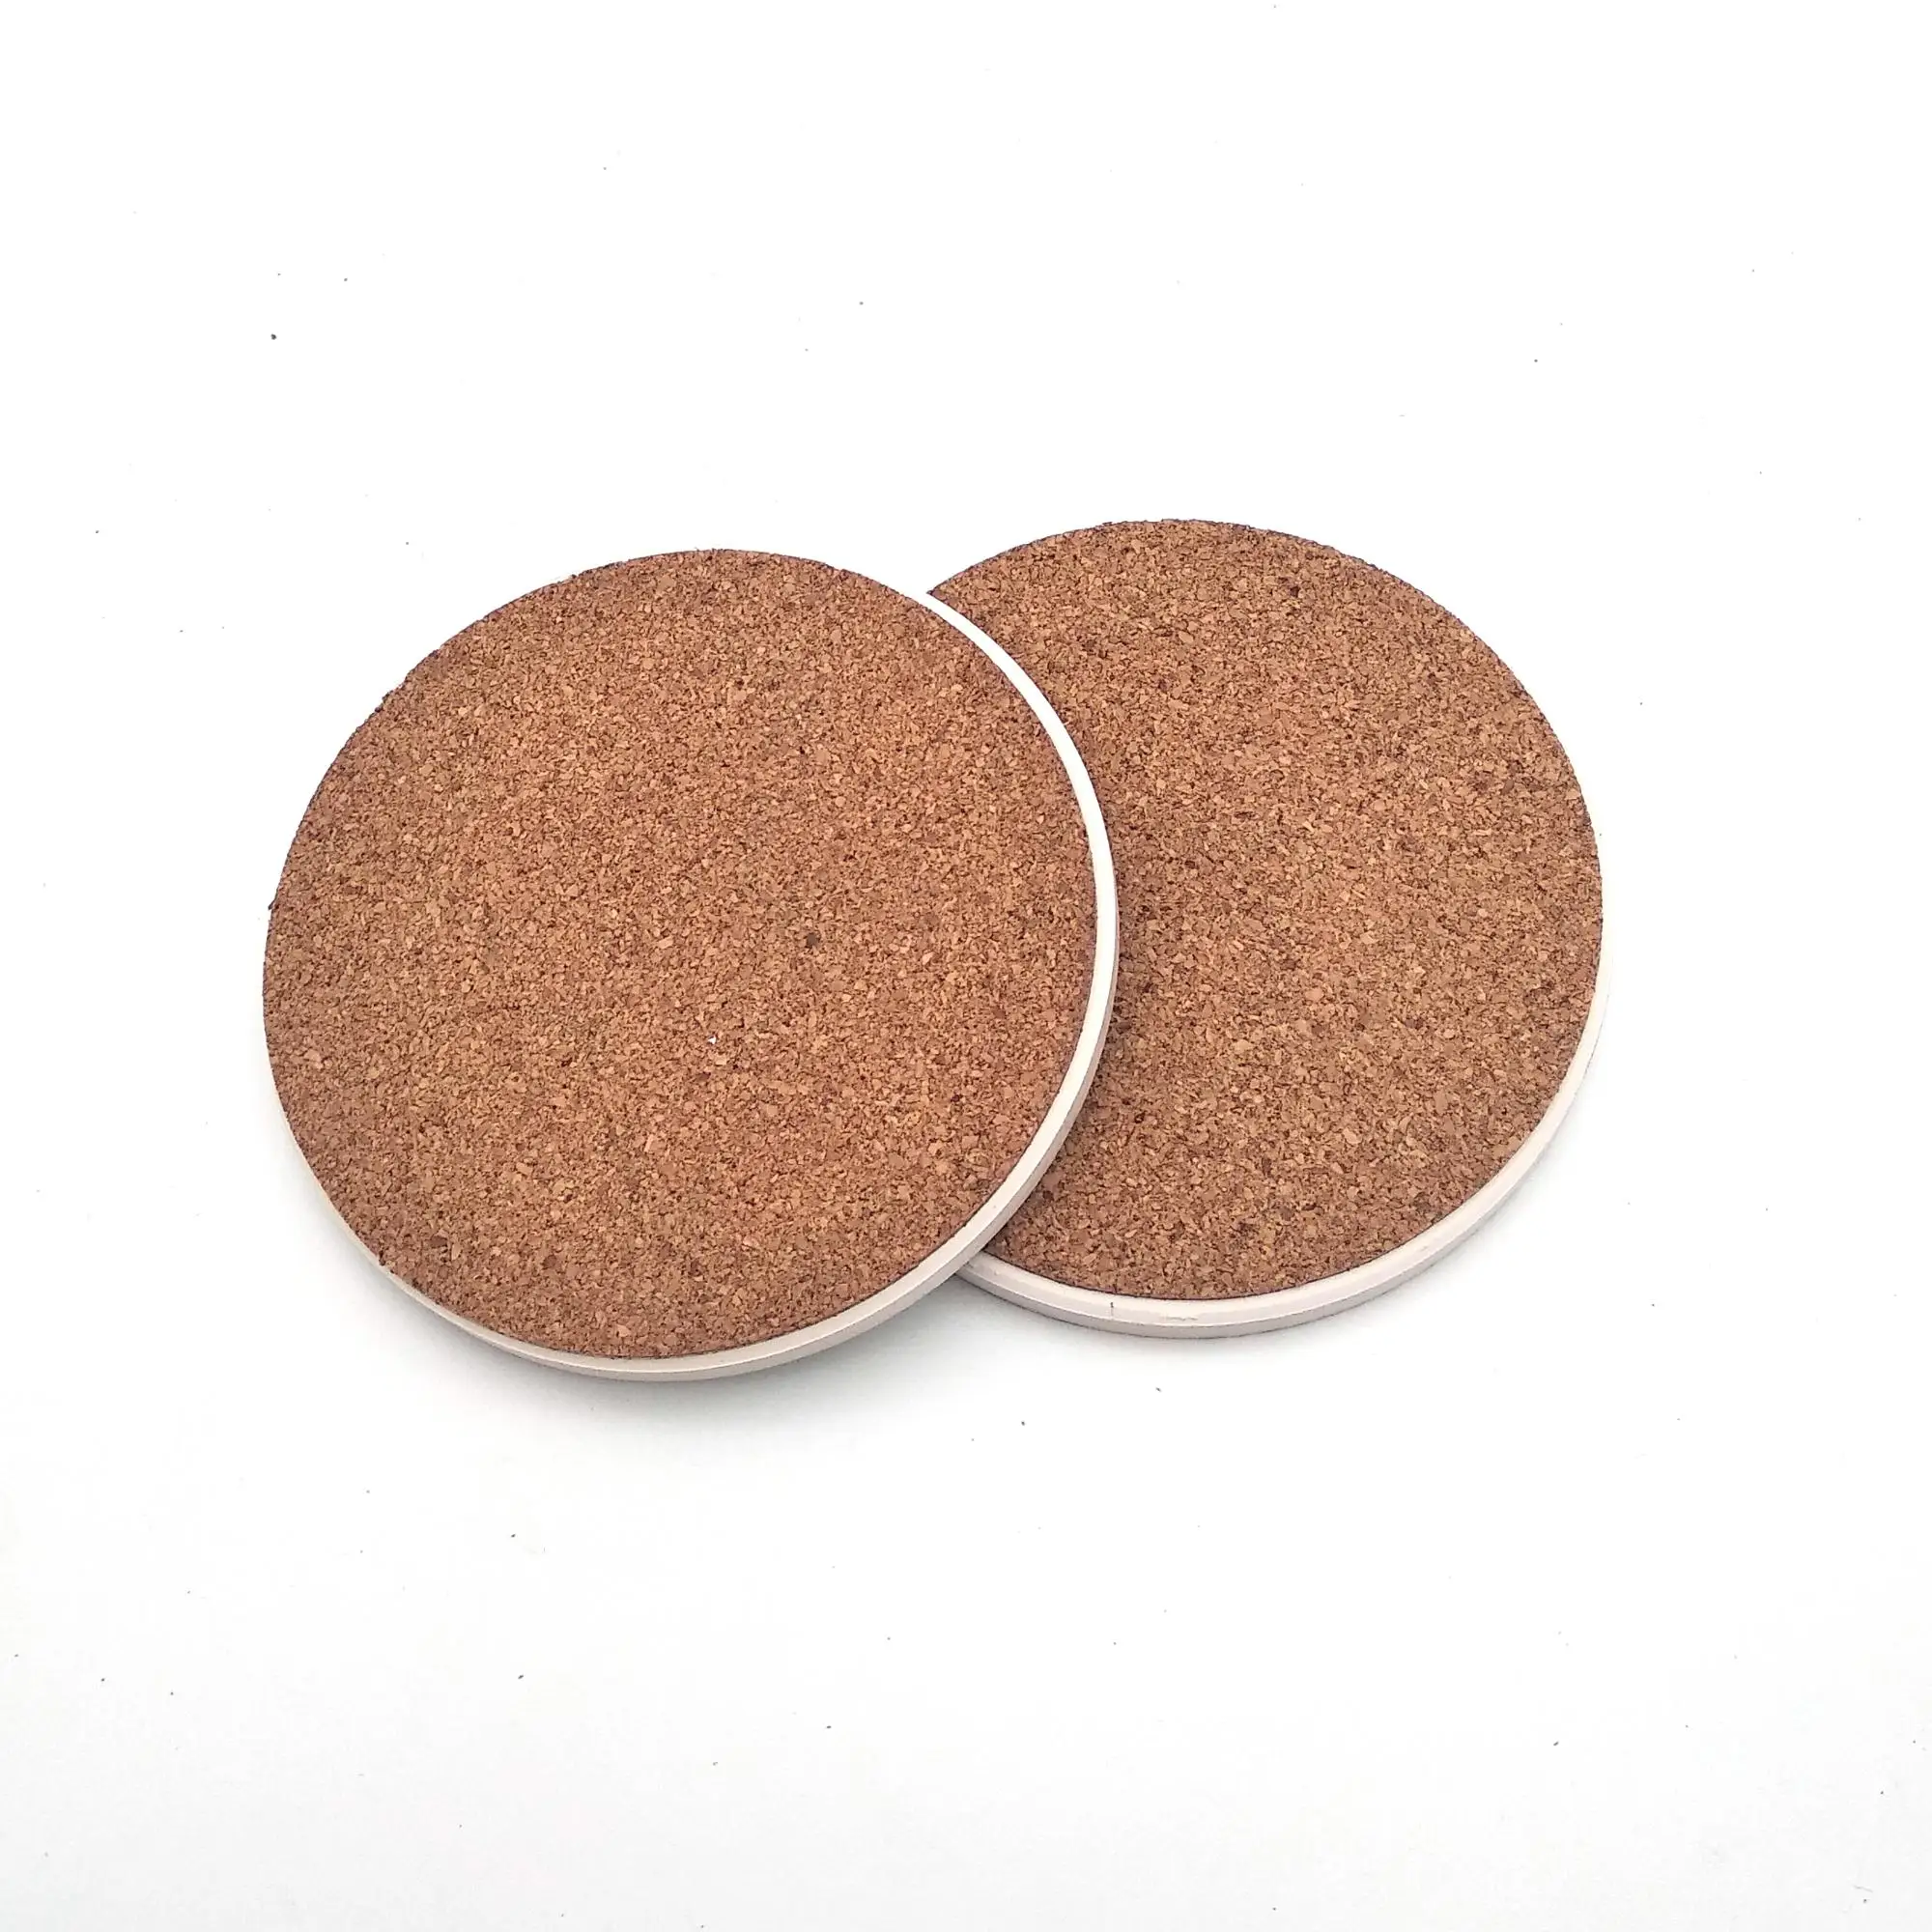 4pc set Absorbent Ceramic Stone Coaster for drink